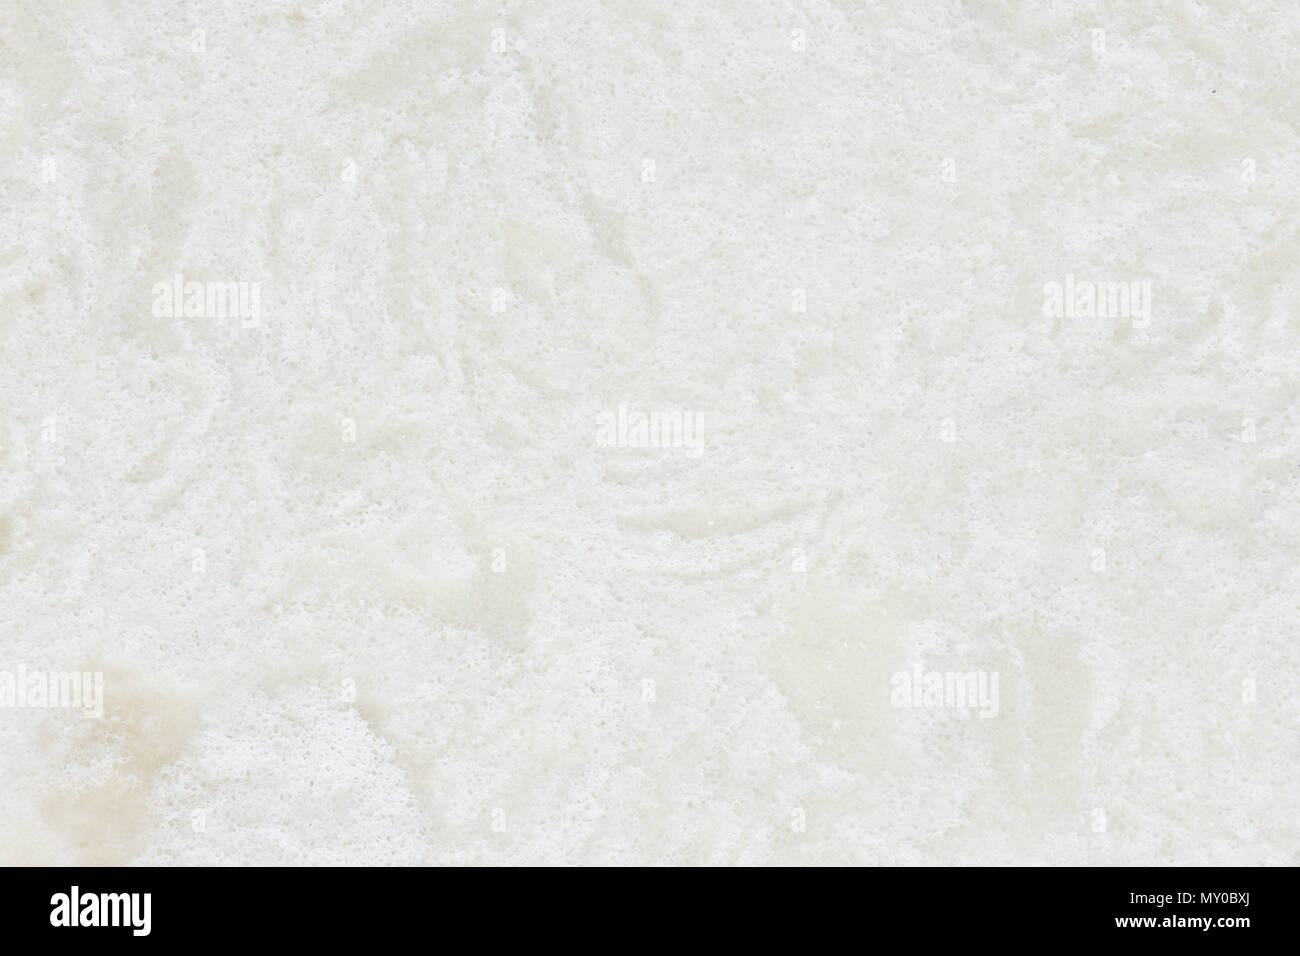 Clean synthetic rock in classic white tone Stock Photo - Alamy